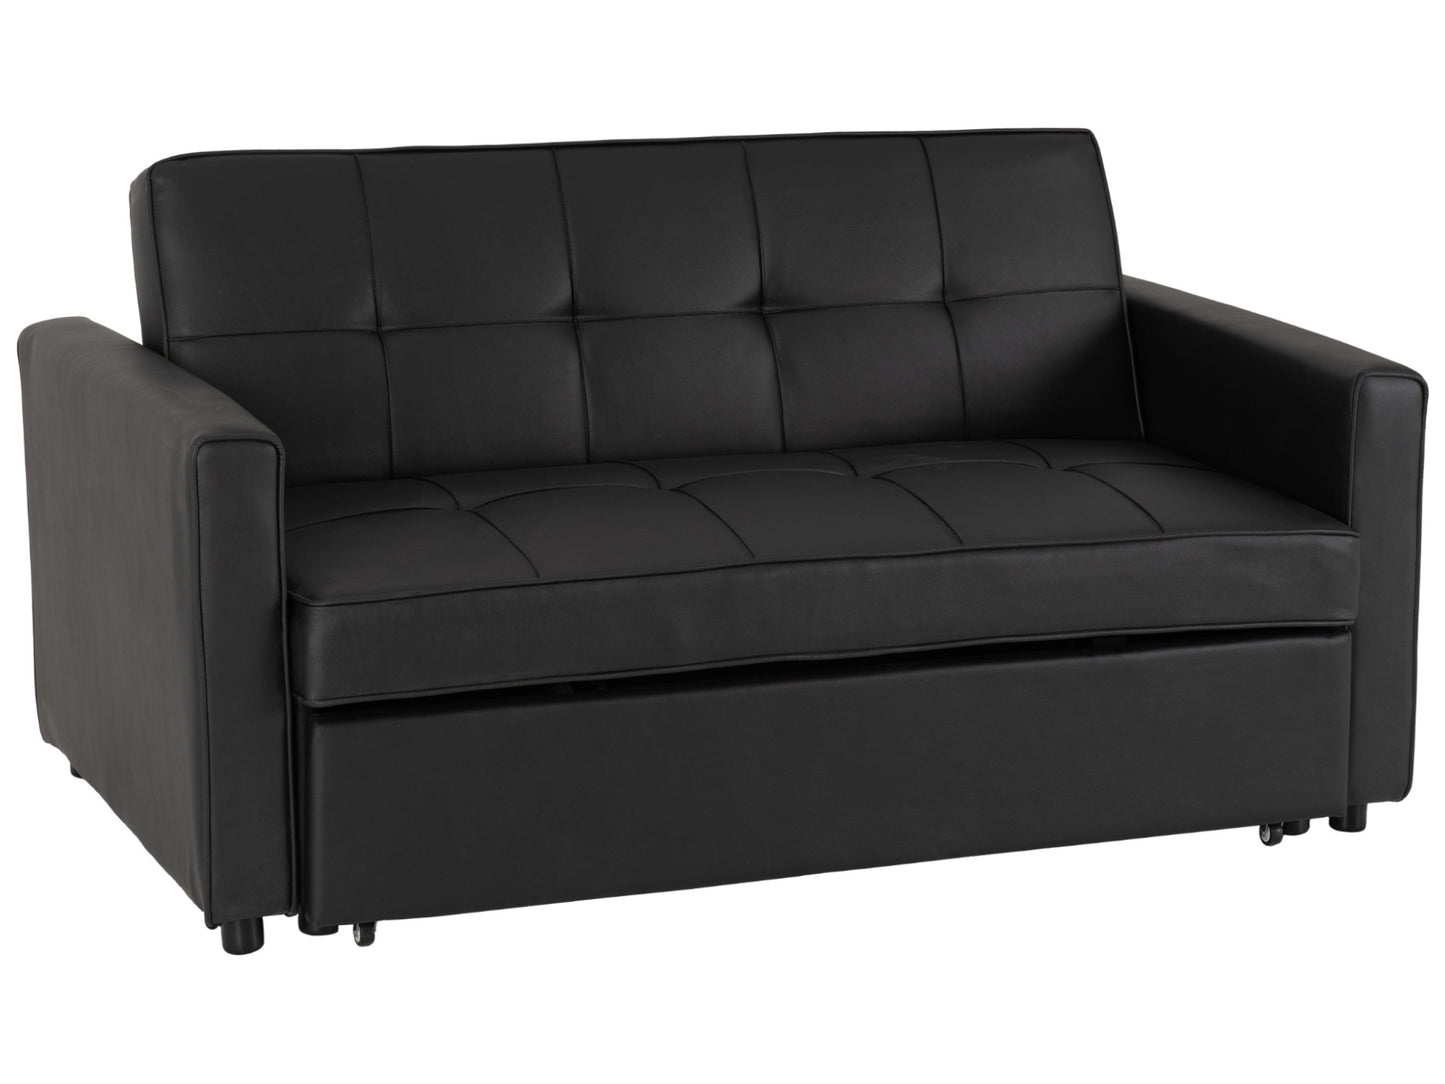 Astoria Sofa Bed in Black Faux Leather